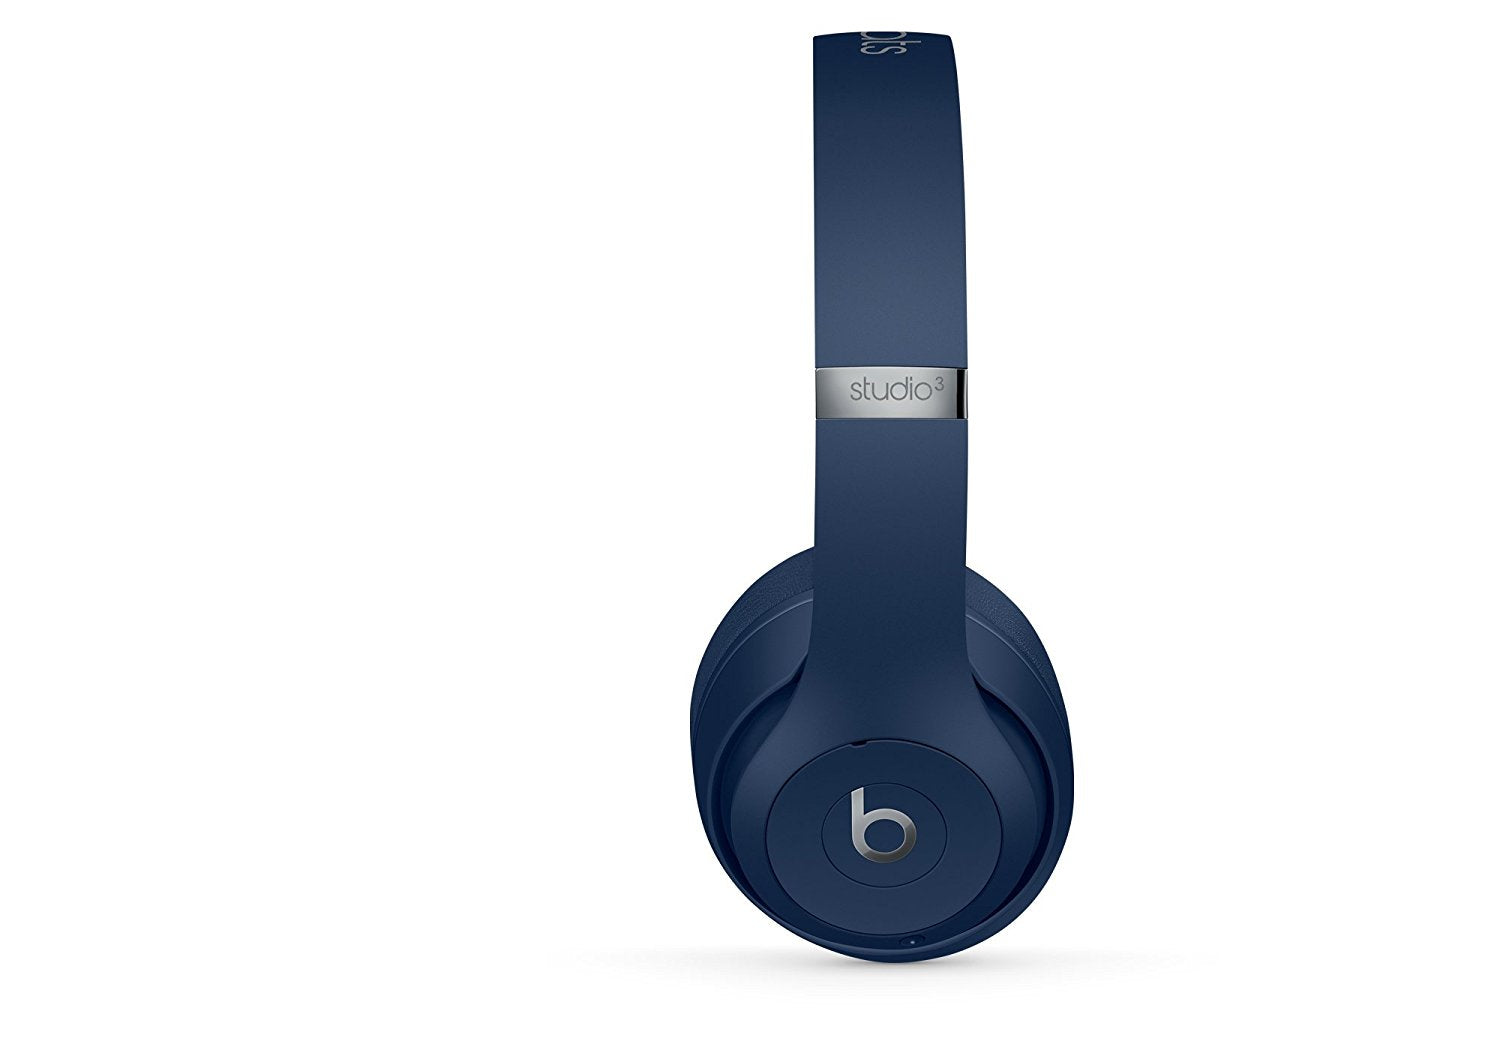 Apple Beats by Dr. Dre Studio 3 Decade Wireless Noise Canceling Over-The-Ear Headphones